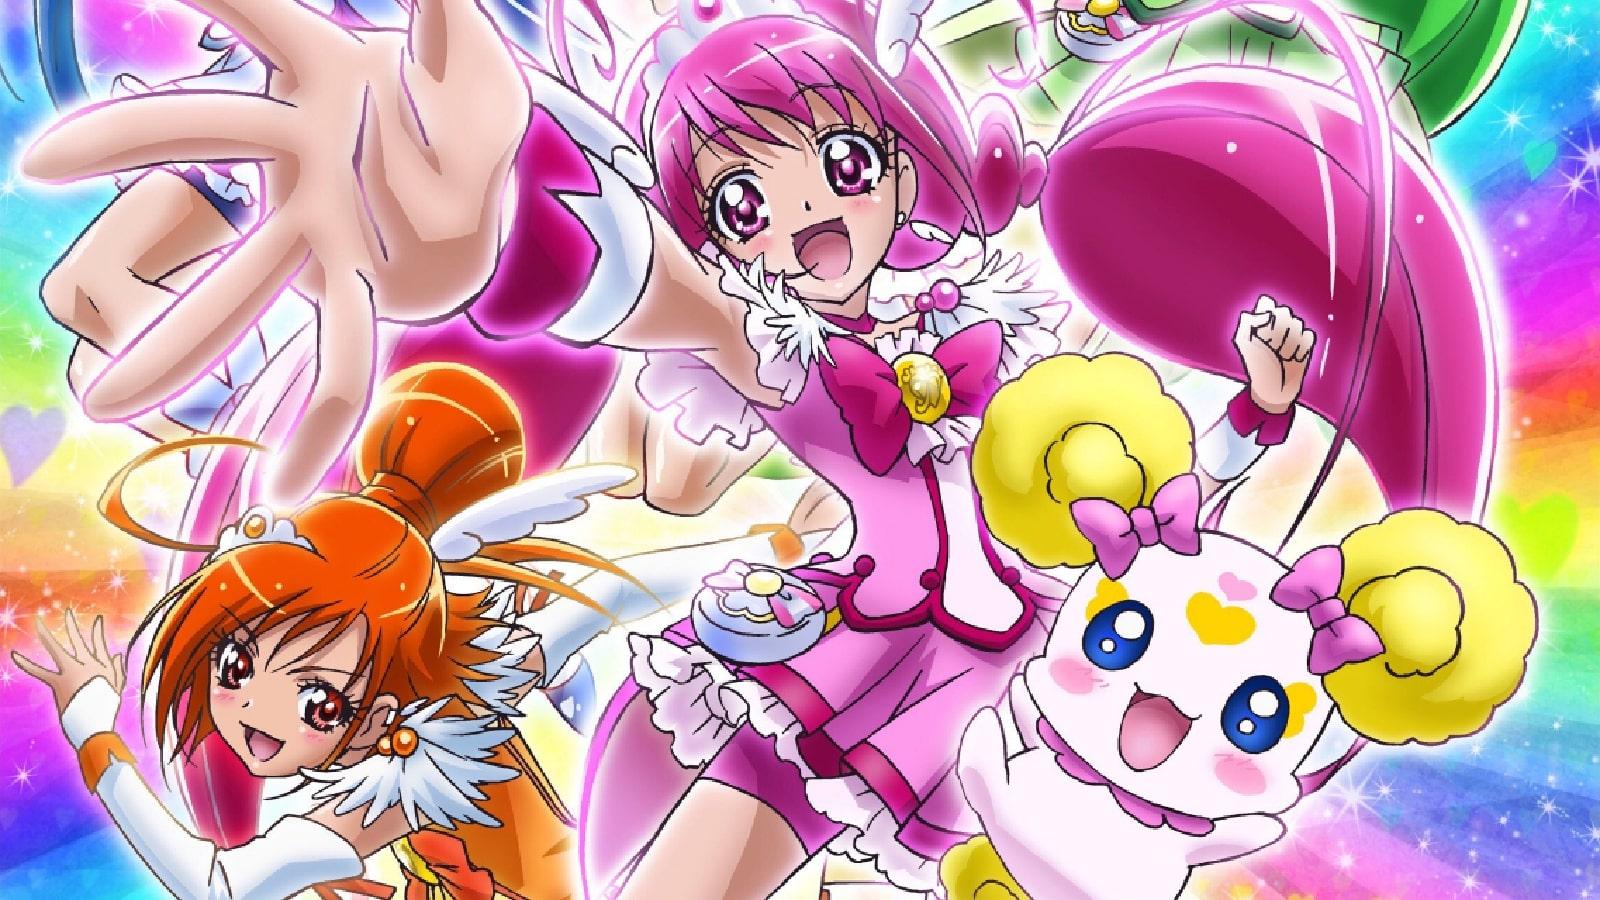 Smile Precure official poster